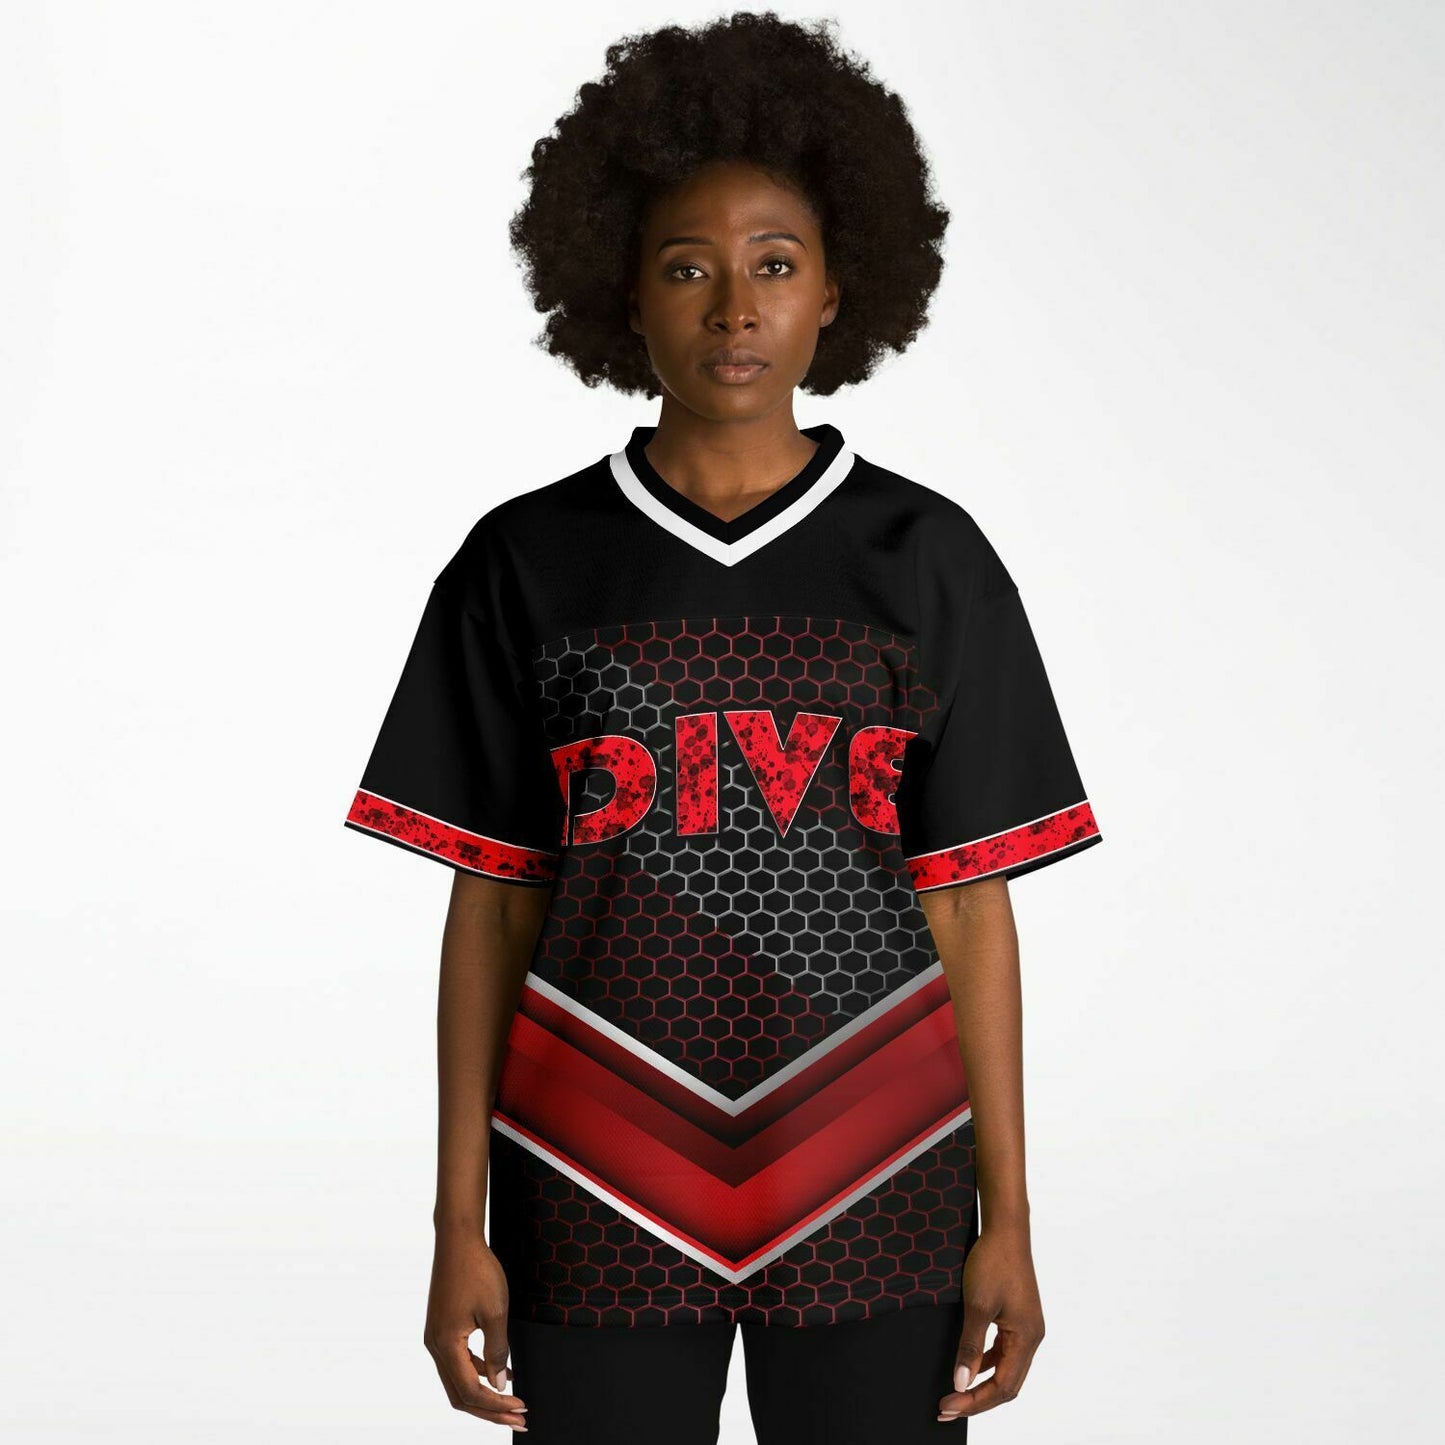 Dive Jersey